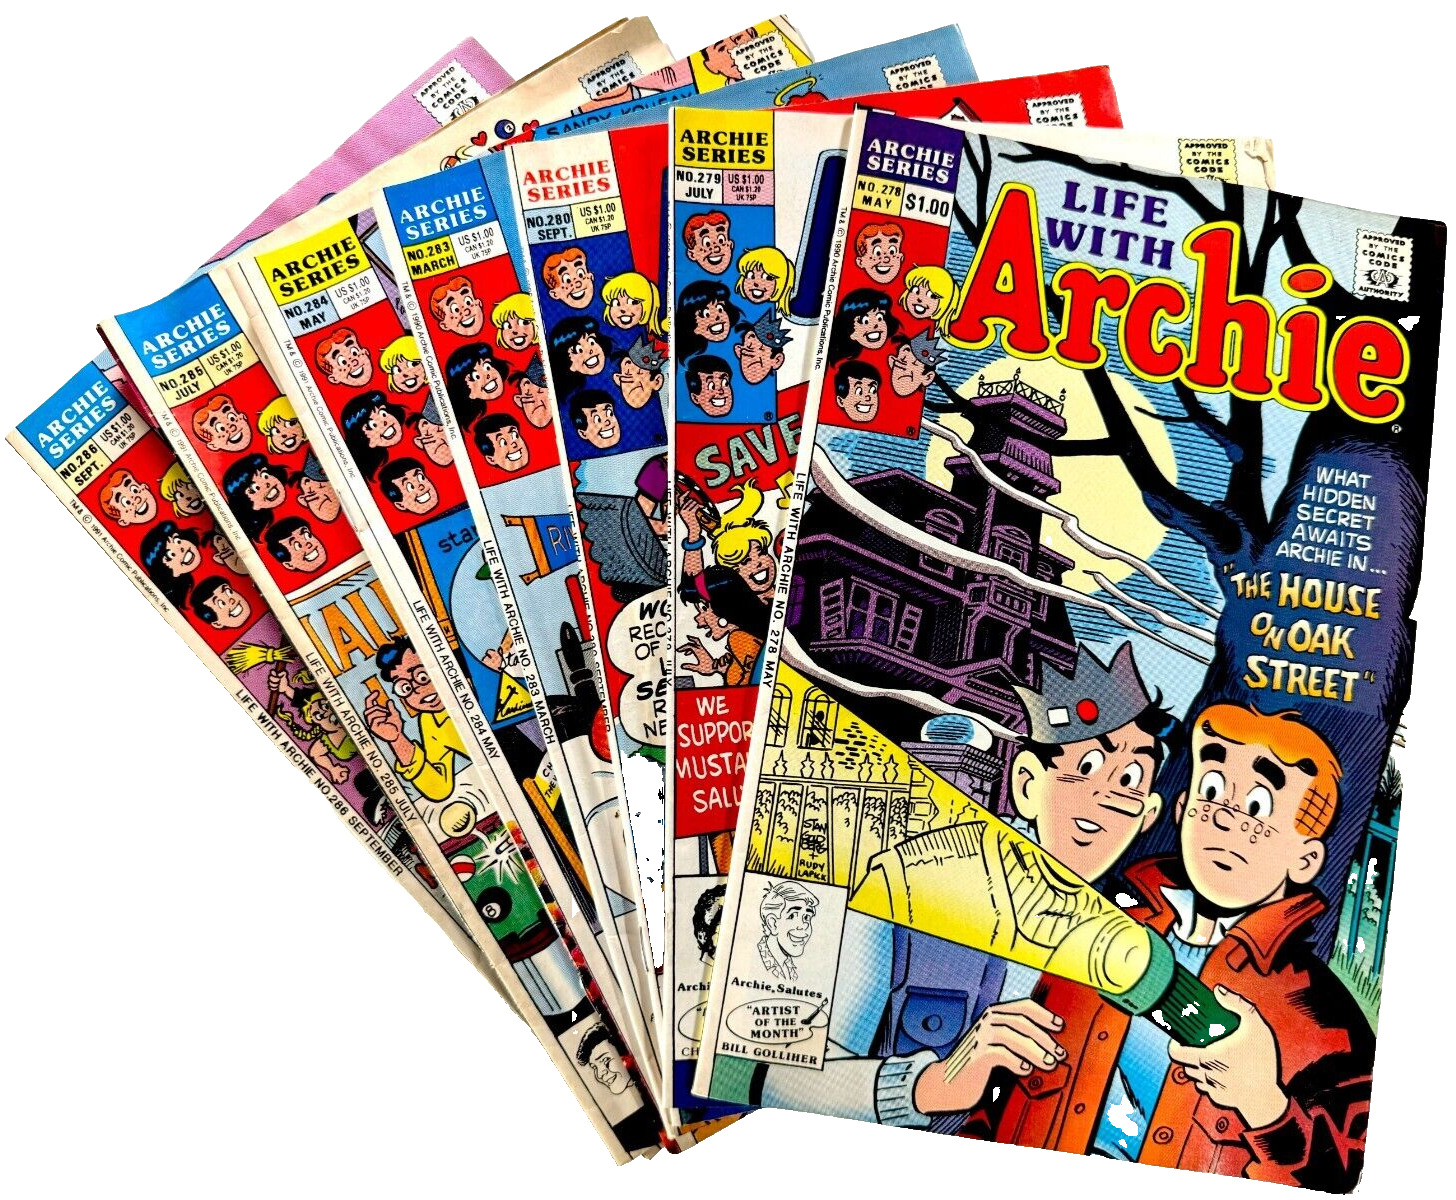 Archie Series LIFE WITH ARCHIE (1990-91) #278-280 283-286 FN to VF Ships FREE